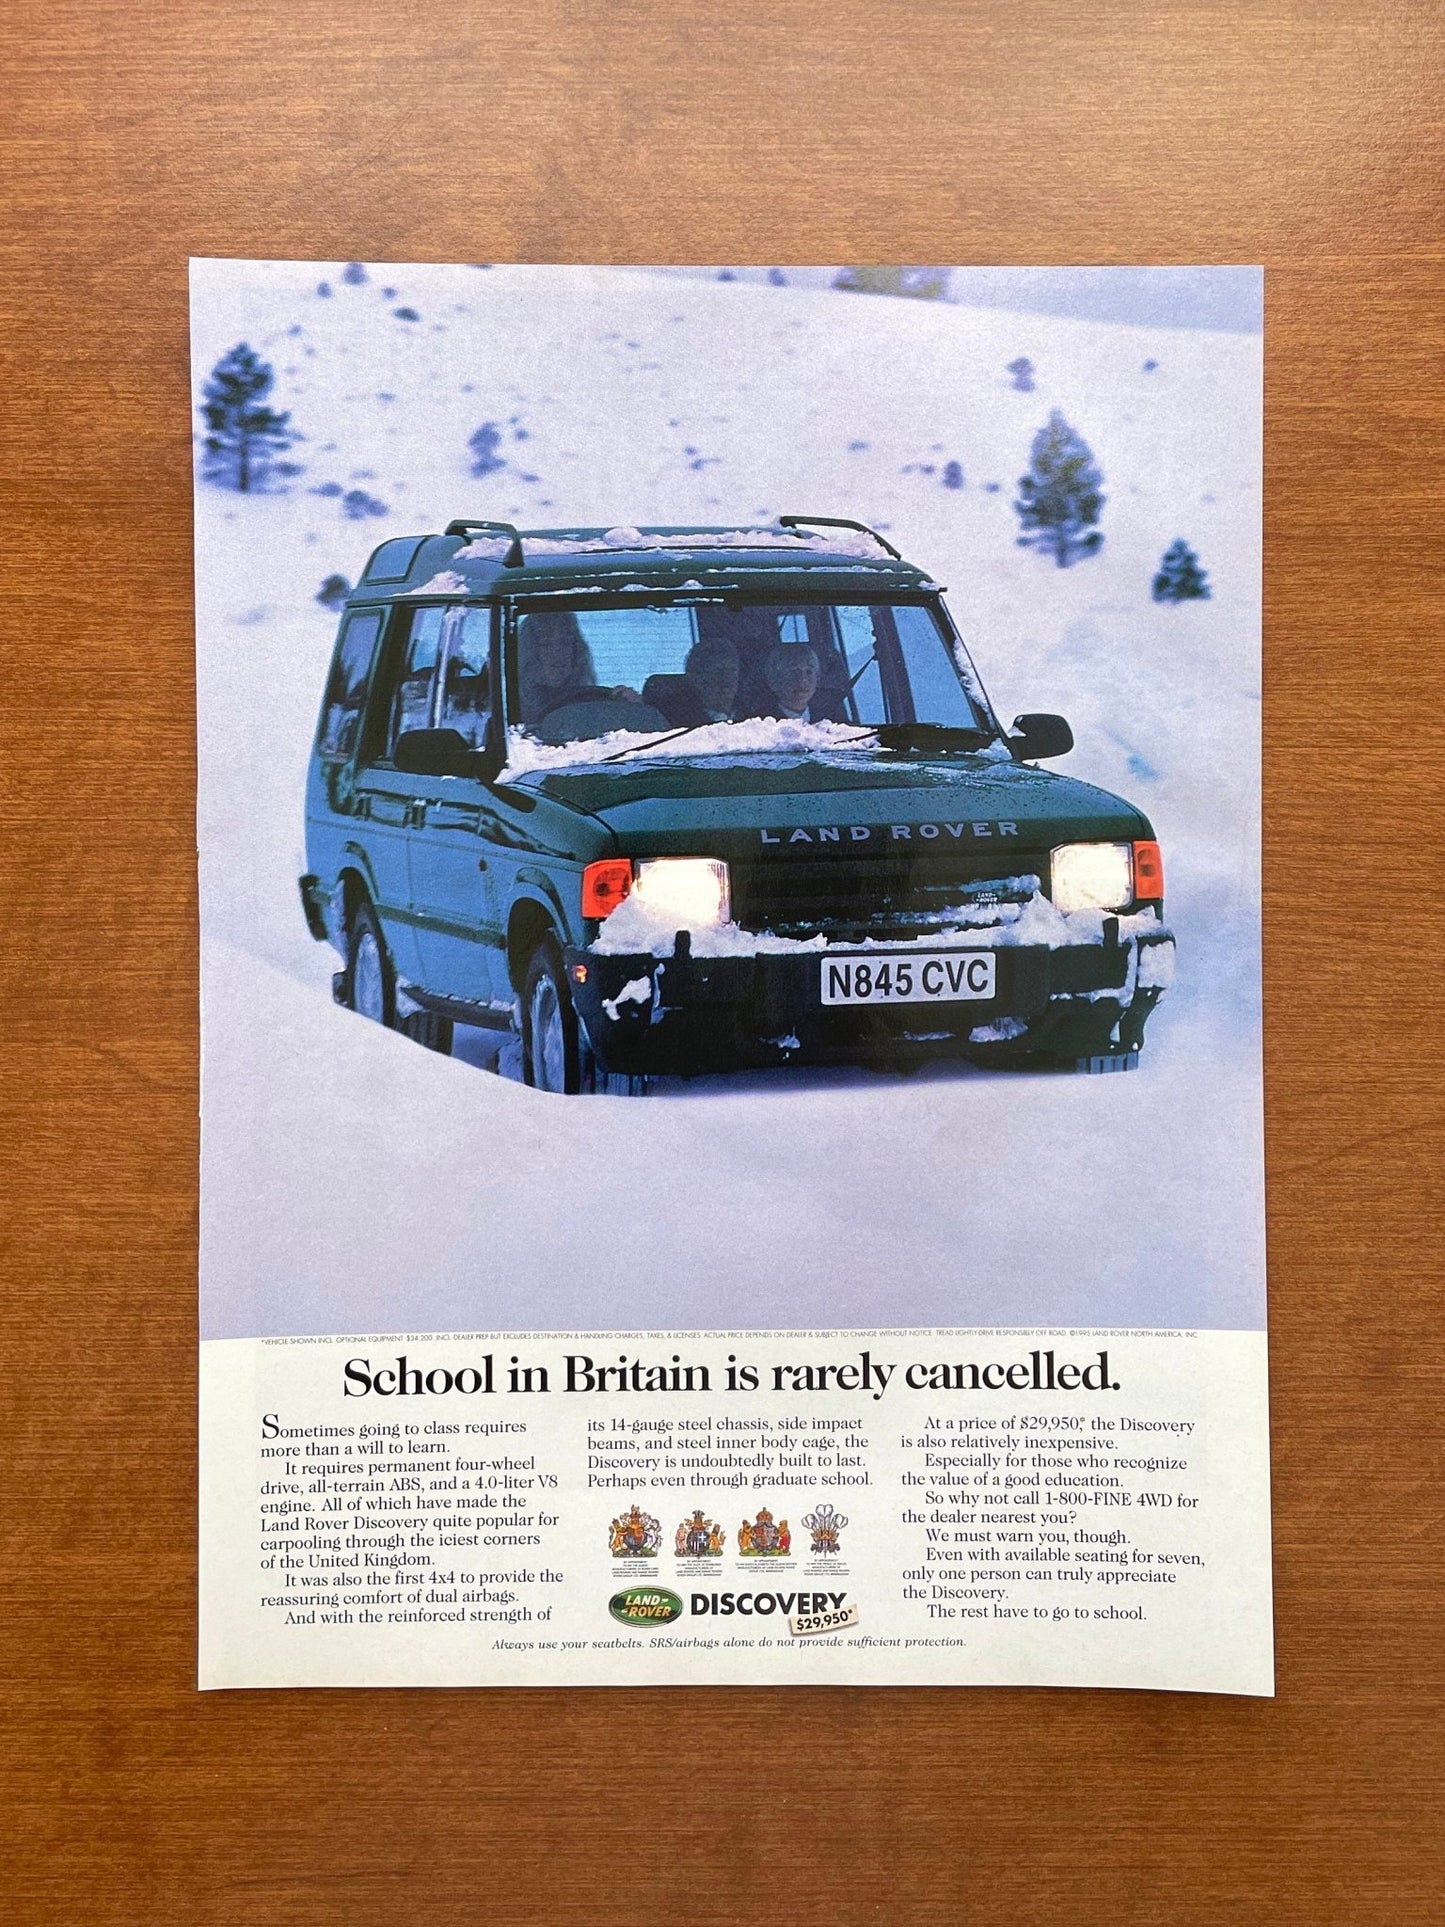 1995 Discovery "School in Britain is rarely cancelled." Advertisement